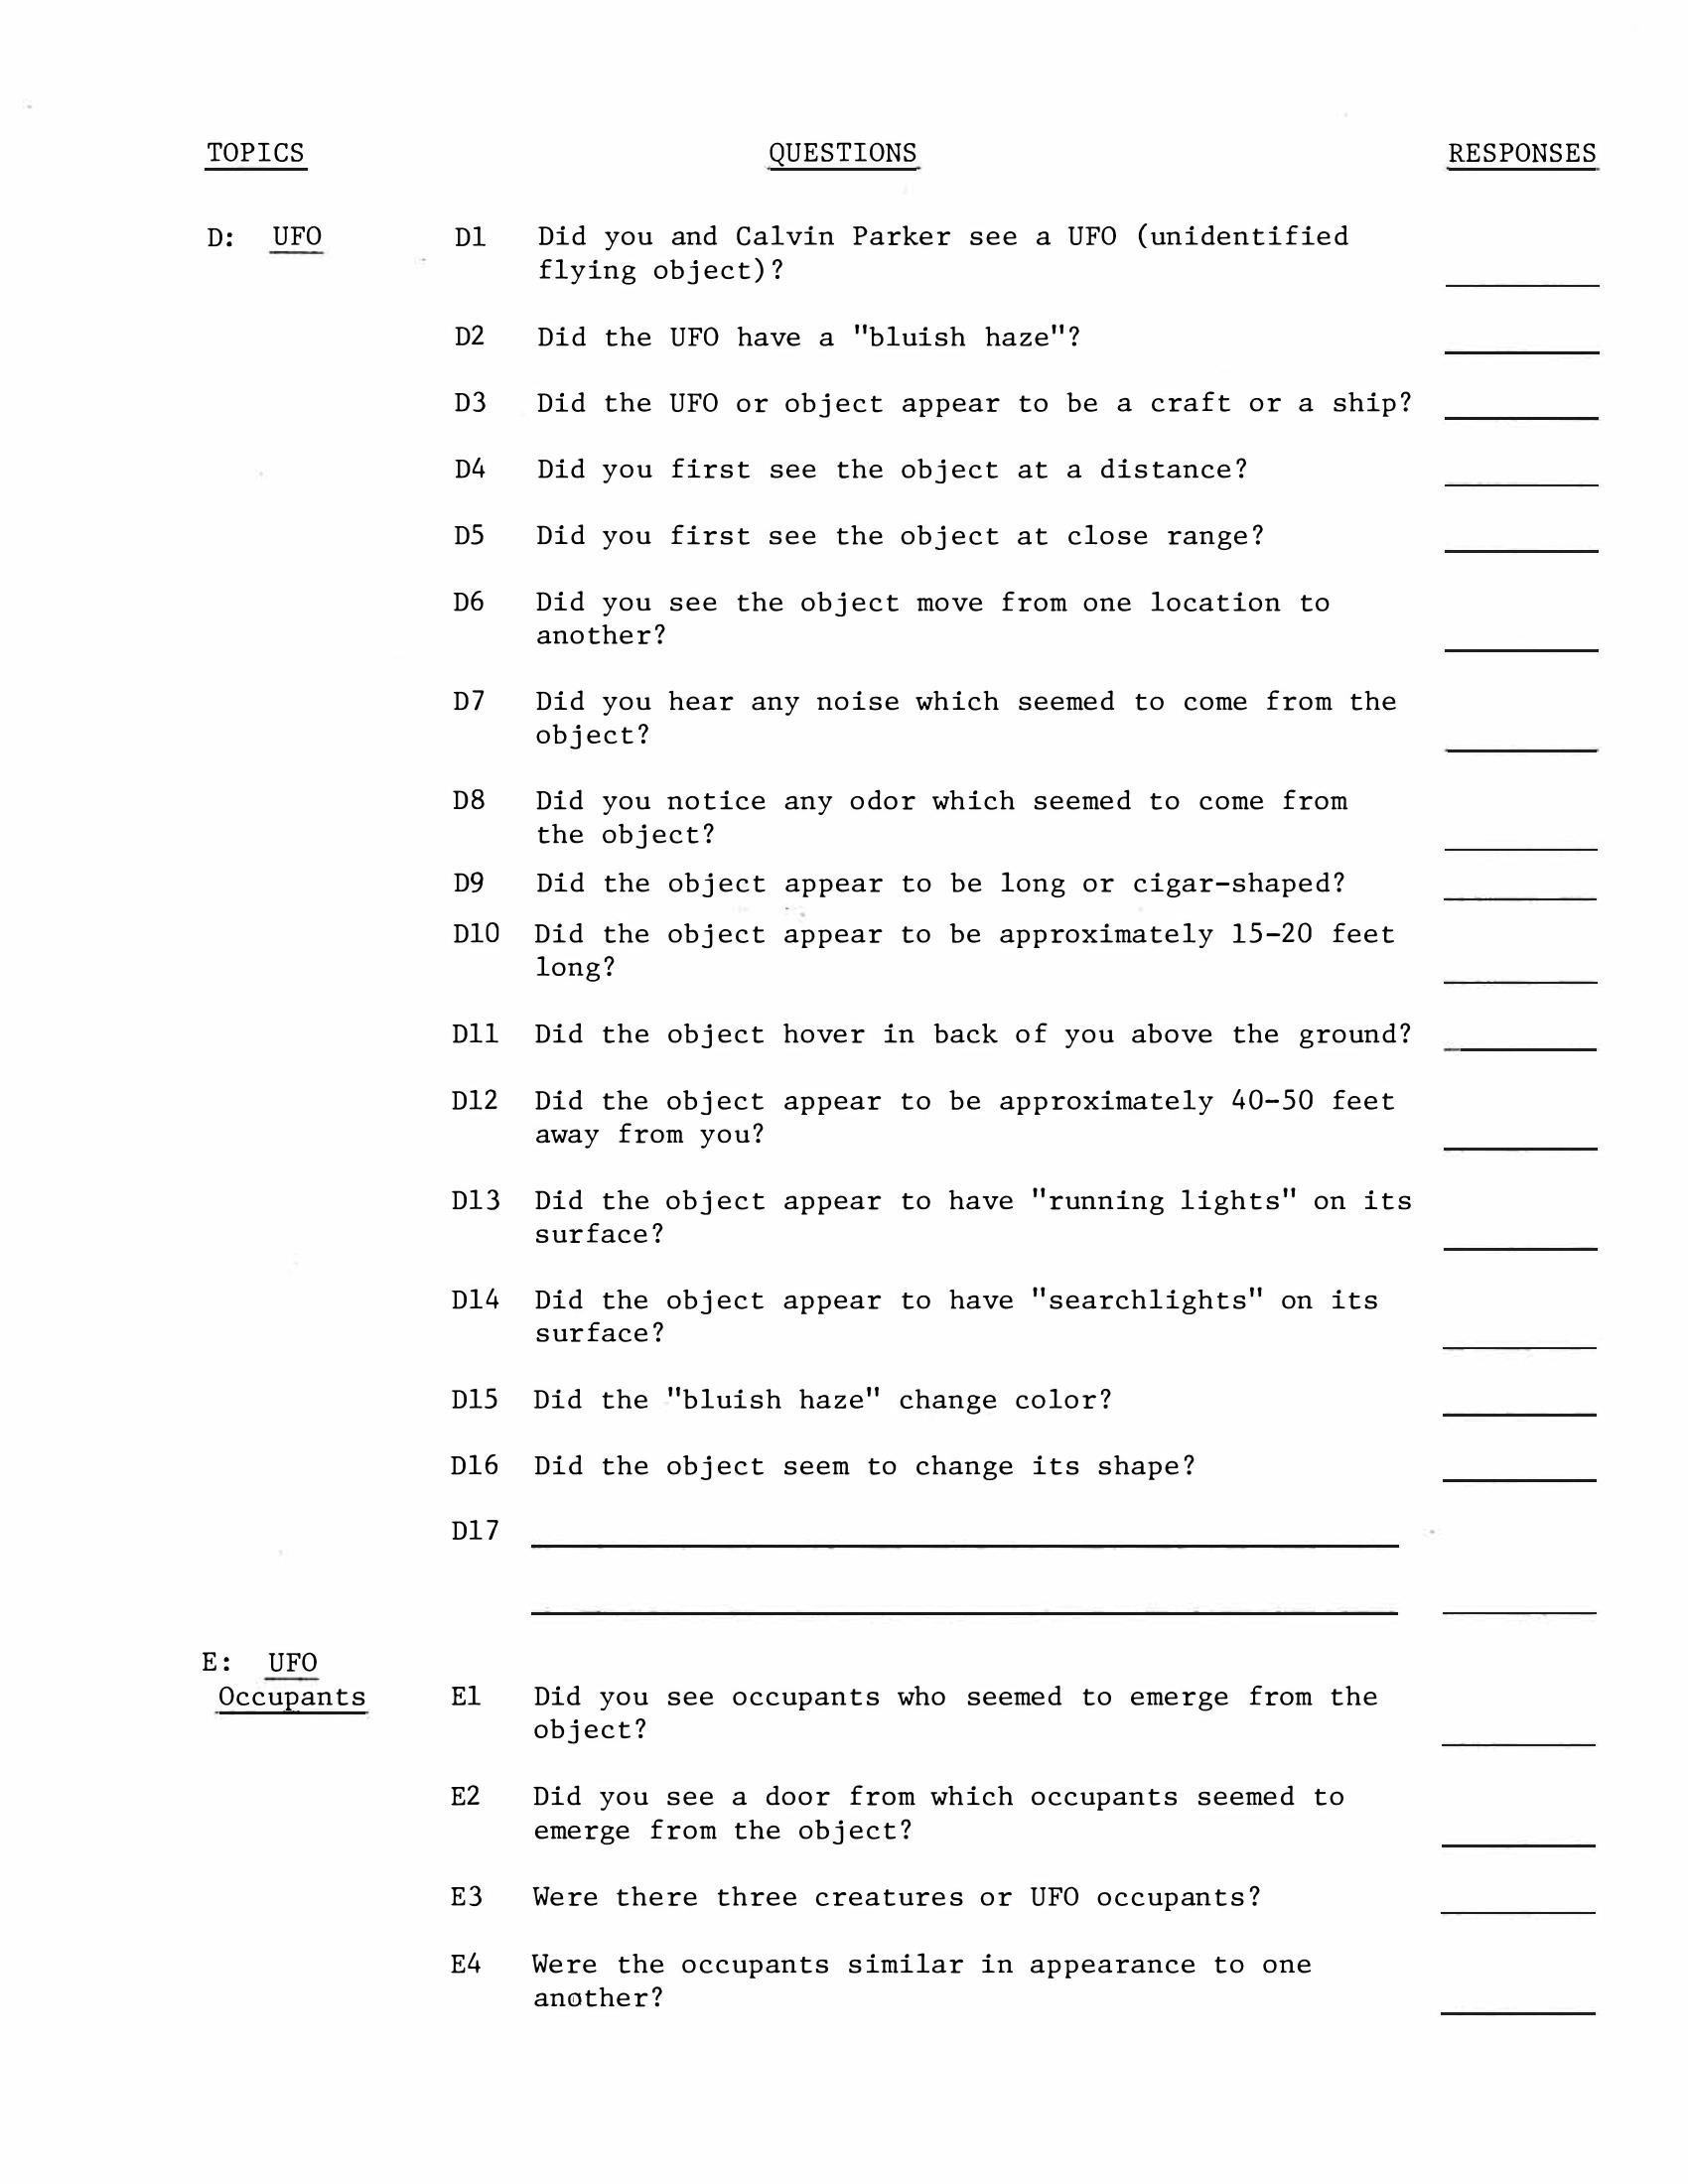 Dr. Sprinkle Questions Page-2